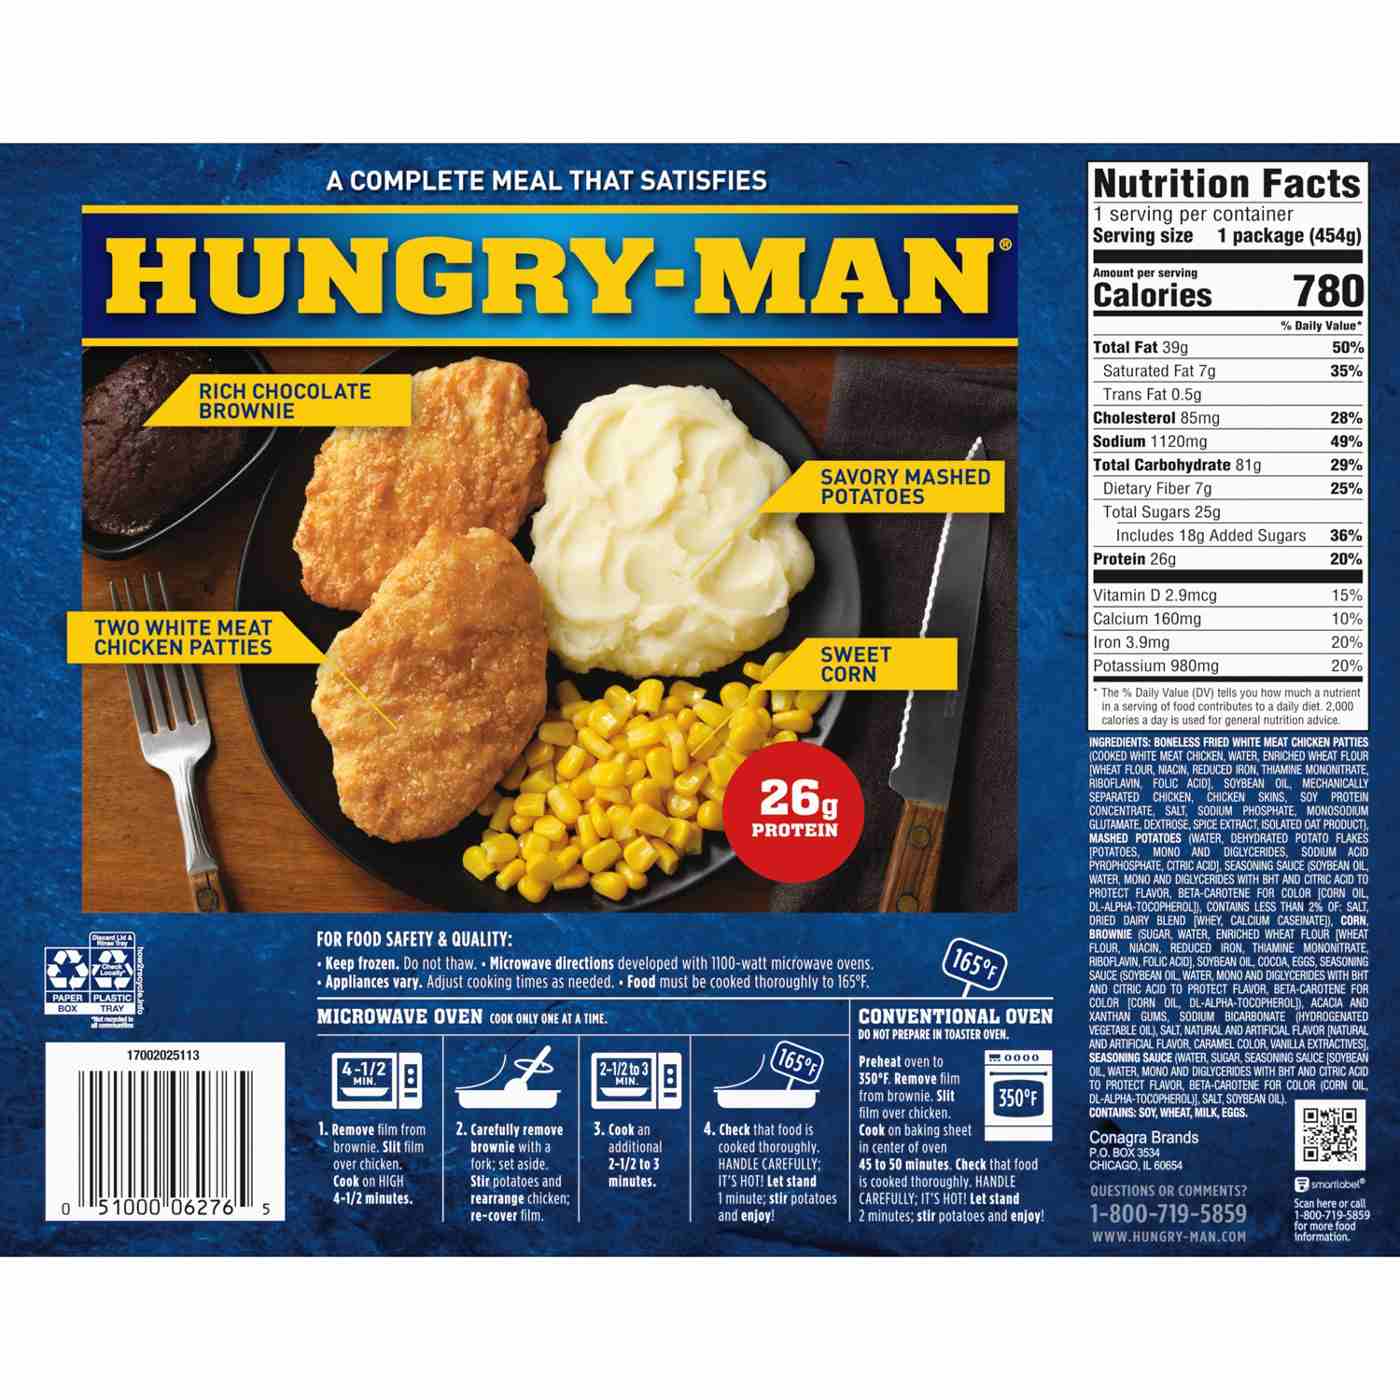 Hungry-Man Boneless Fried Chicken Frozen Meal; image 3 of 7